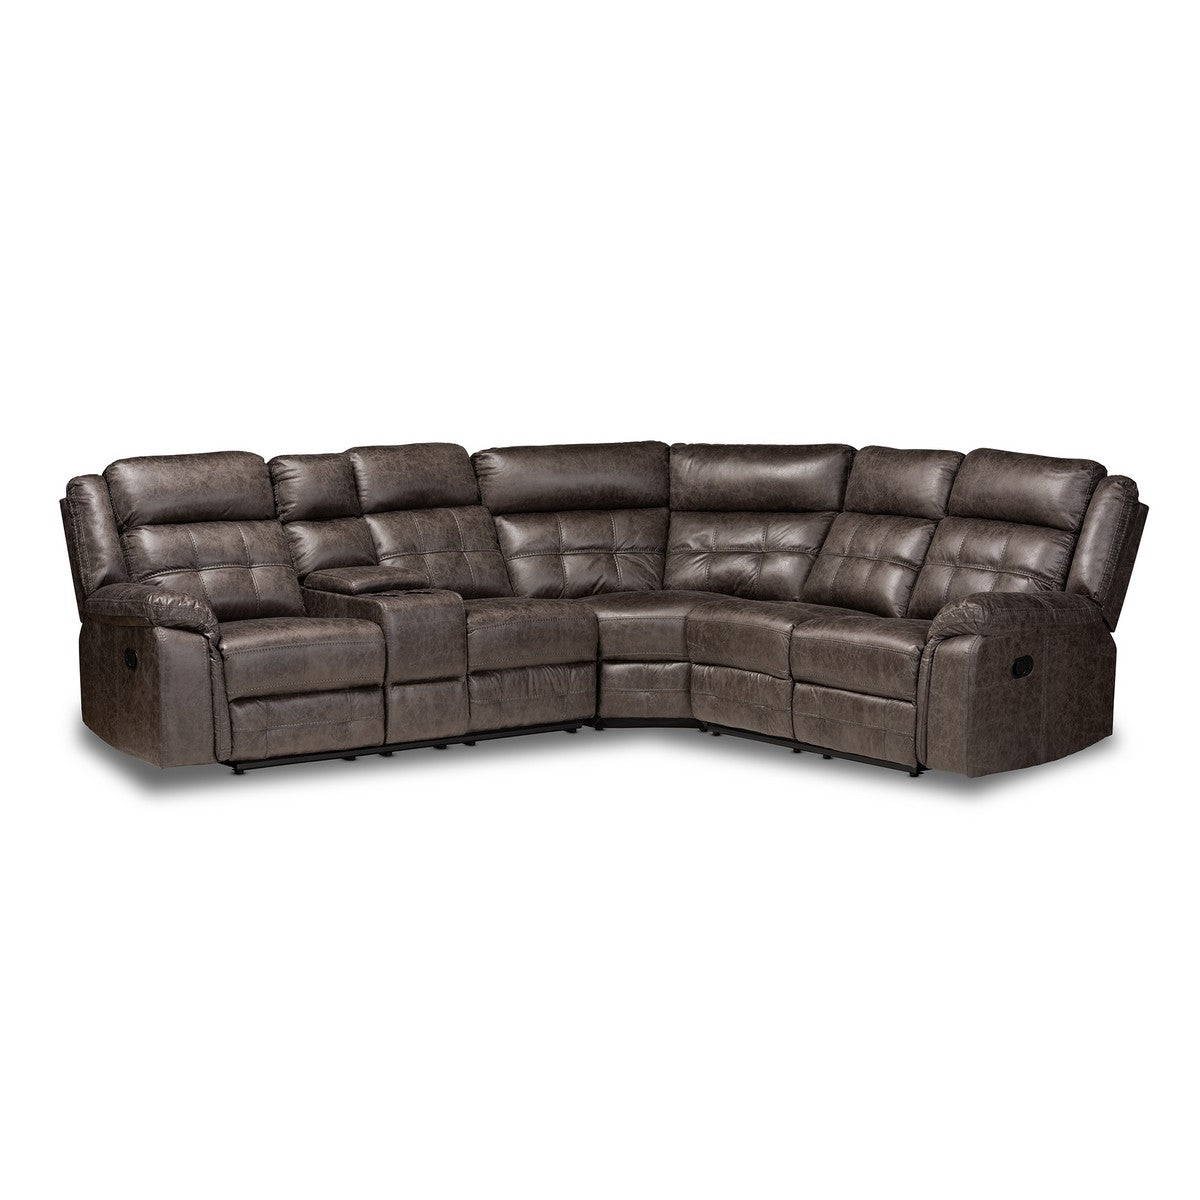 Baxton Studio Vesa Modern and Contemporary Grey Leather-Like Fabric Upholstered 6-Piece Sectional Recliner Sofa with 2 Reclining Seats  Baxton Studio- Sectional Sofas-Minimal And Modern - 1